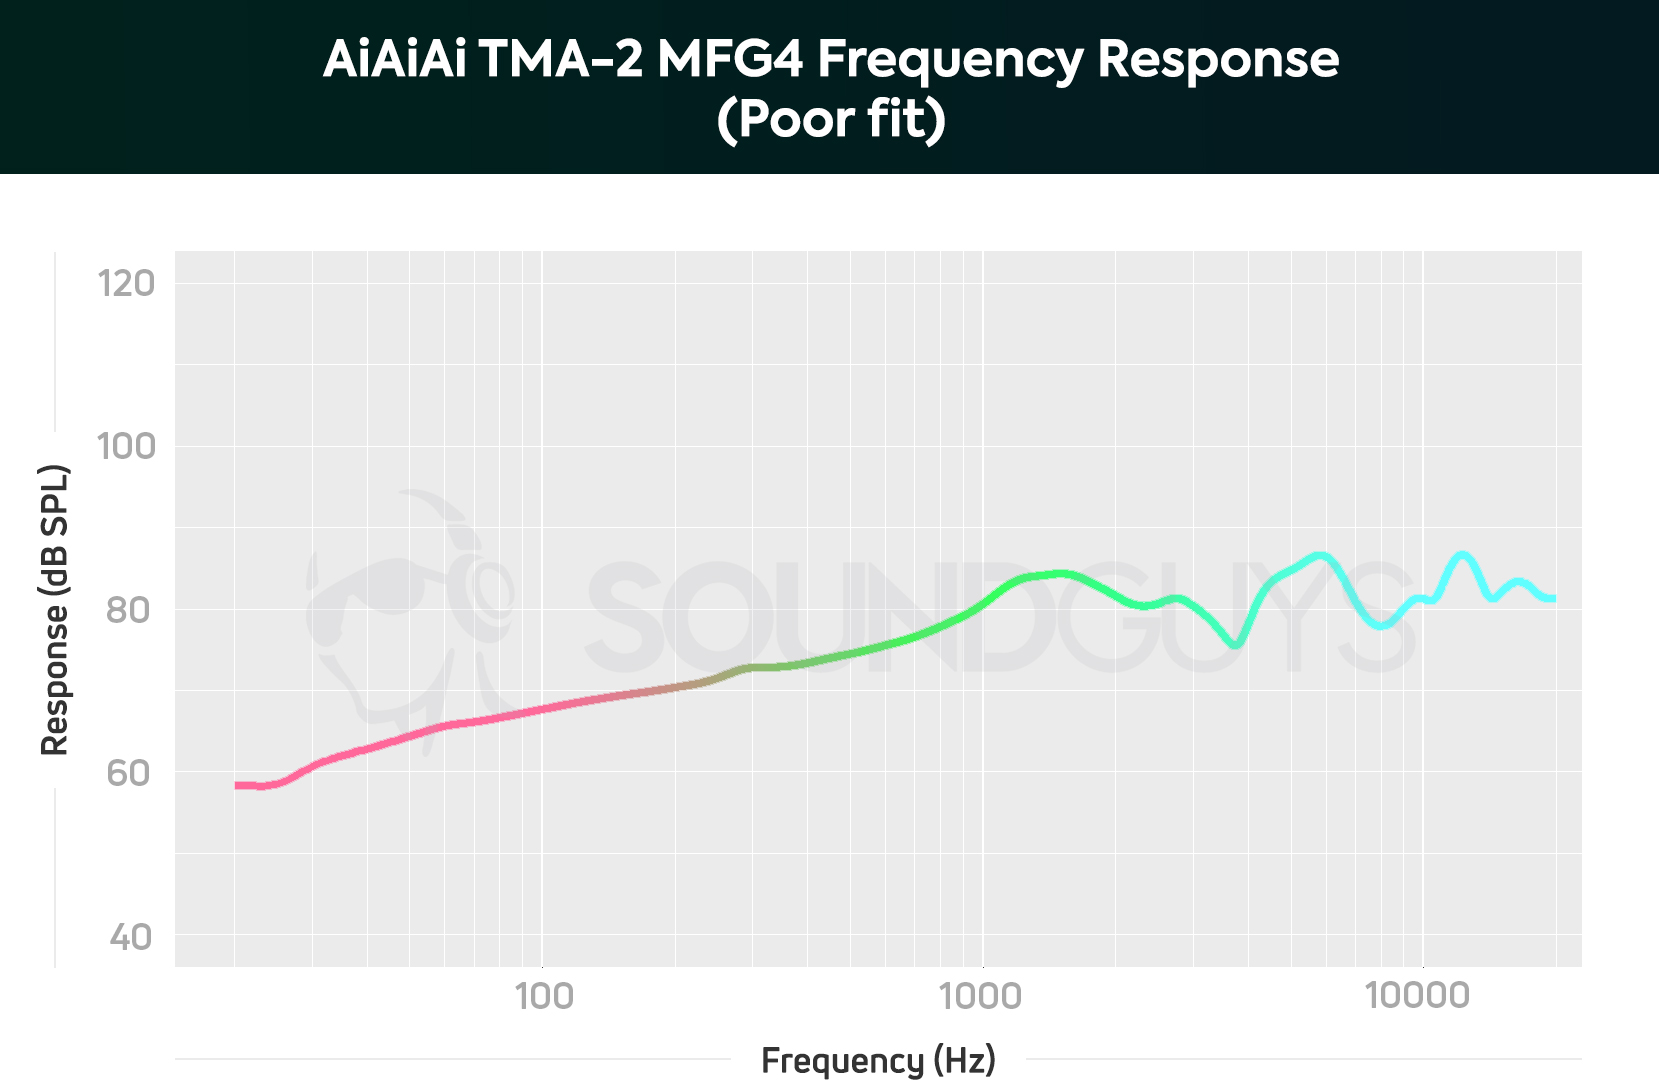 A chart showing the performance of the AIAIAI TMA-2 MFG4.